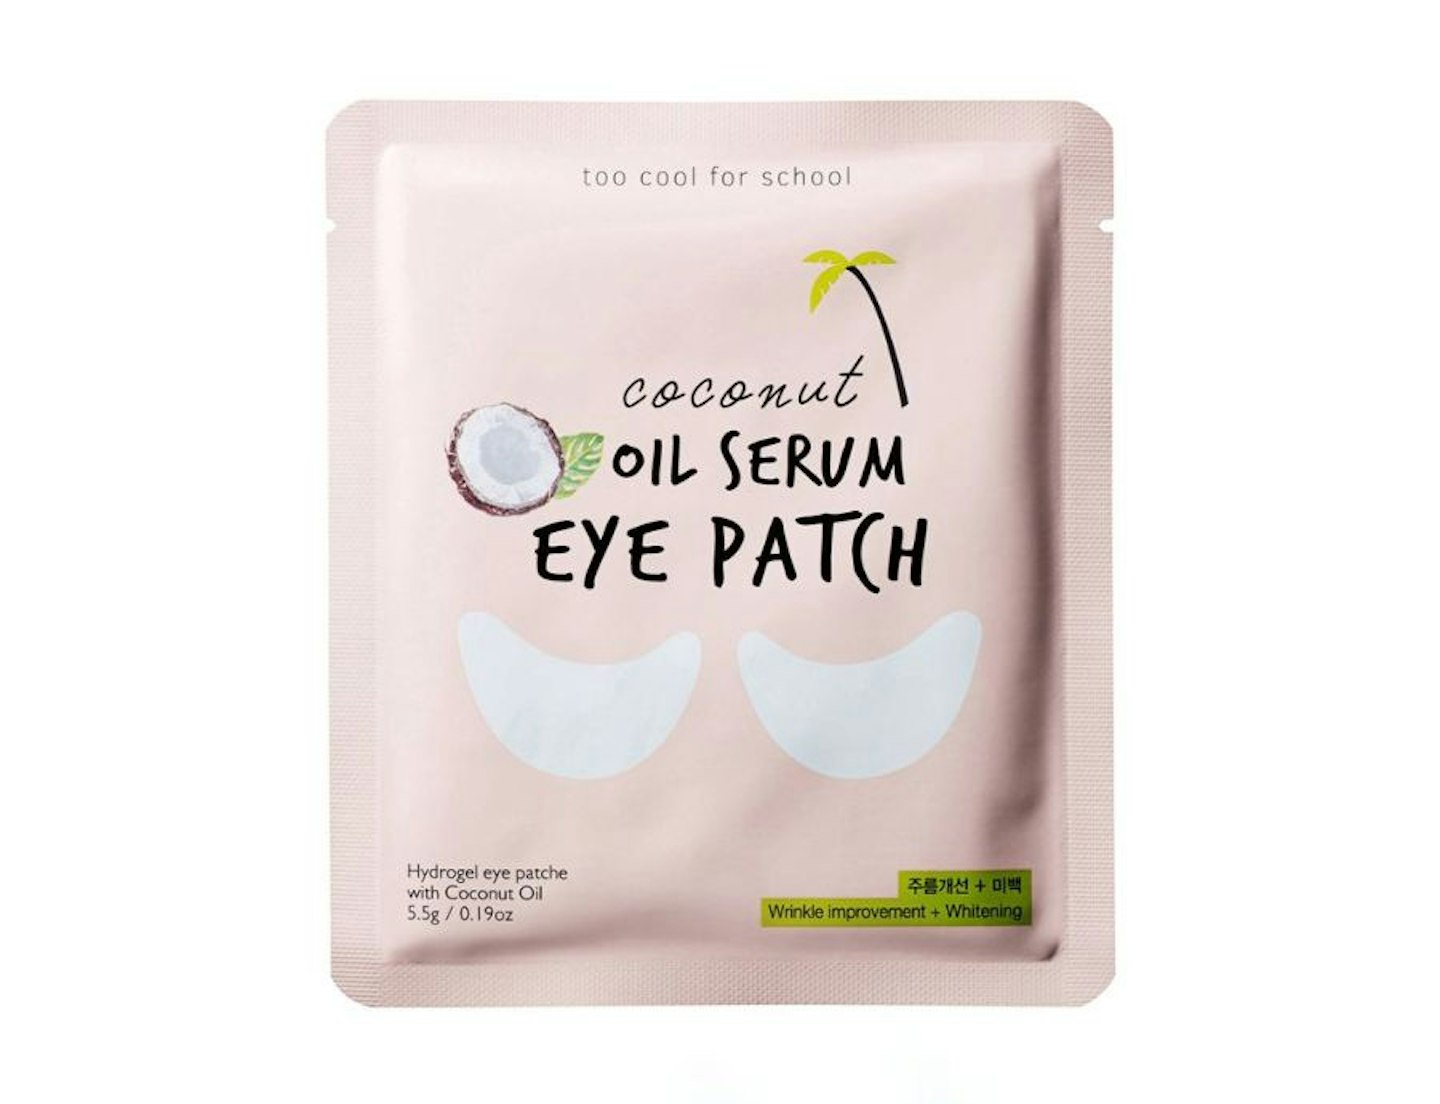 Too Cool For School Coconut Oil Serum Eye Patch, £6.50, cultbeauty.co.uk